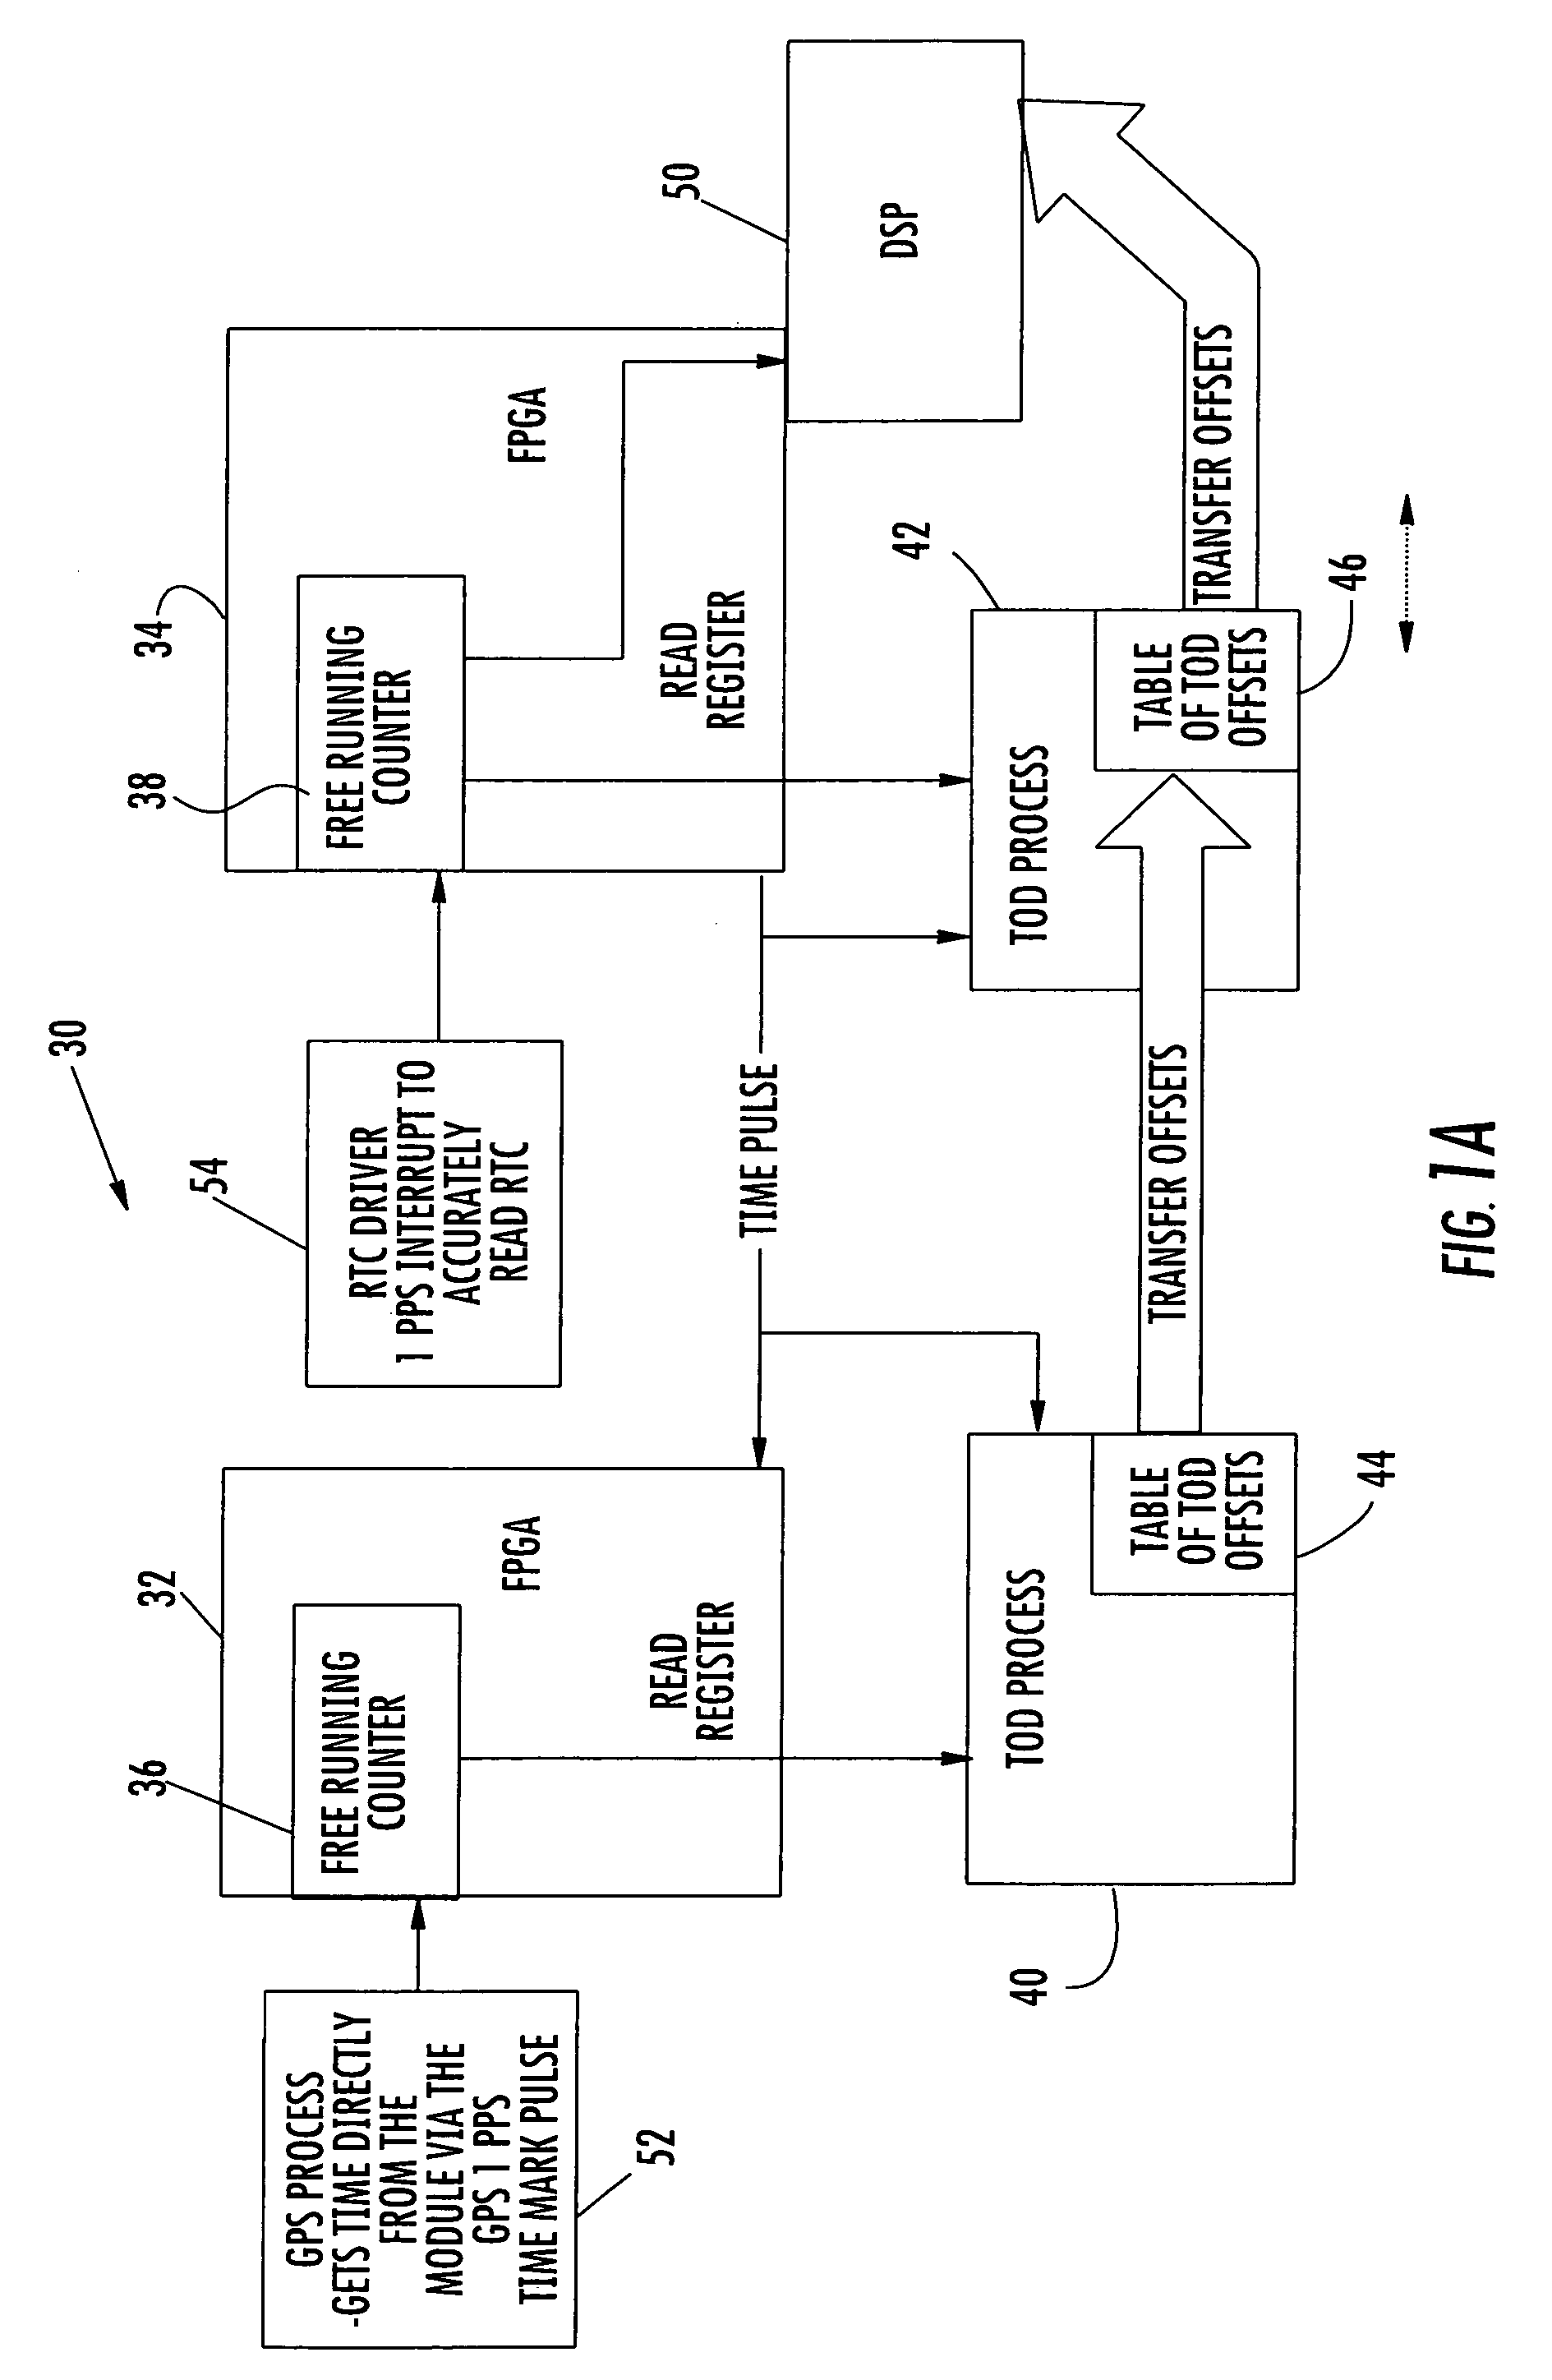 Time of day synchronization and distribution within a multiprocessor embedded system and related methods